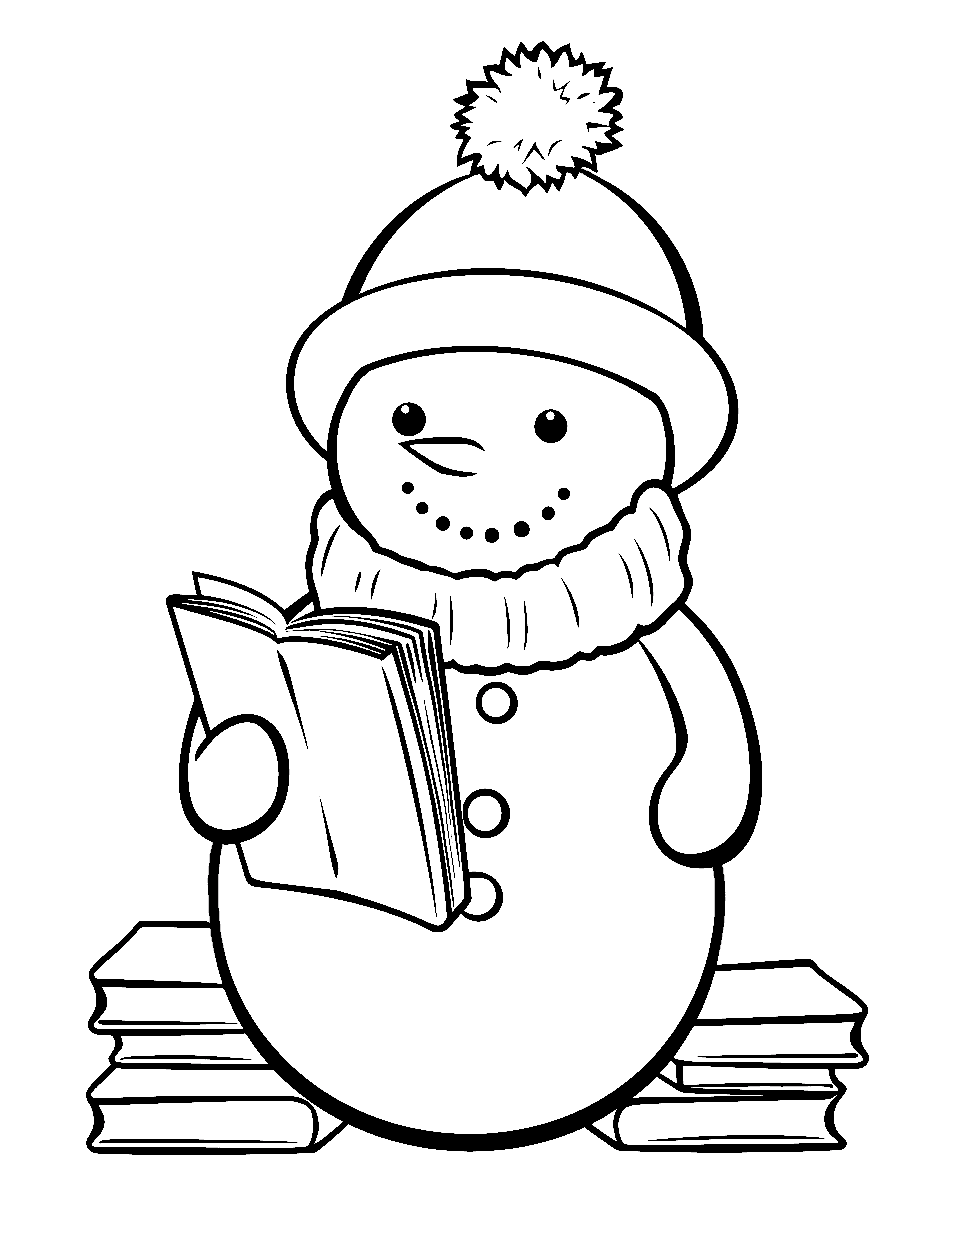 Snowman Reading a Book Coloring Page - A snowman reading a book with a happy smile on their face.